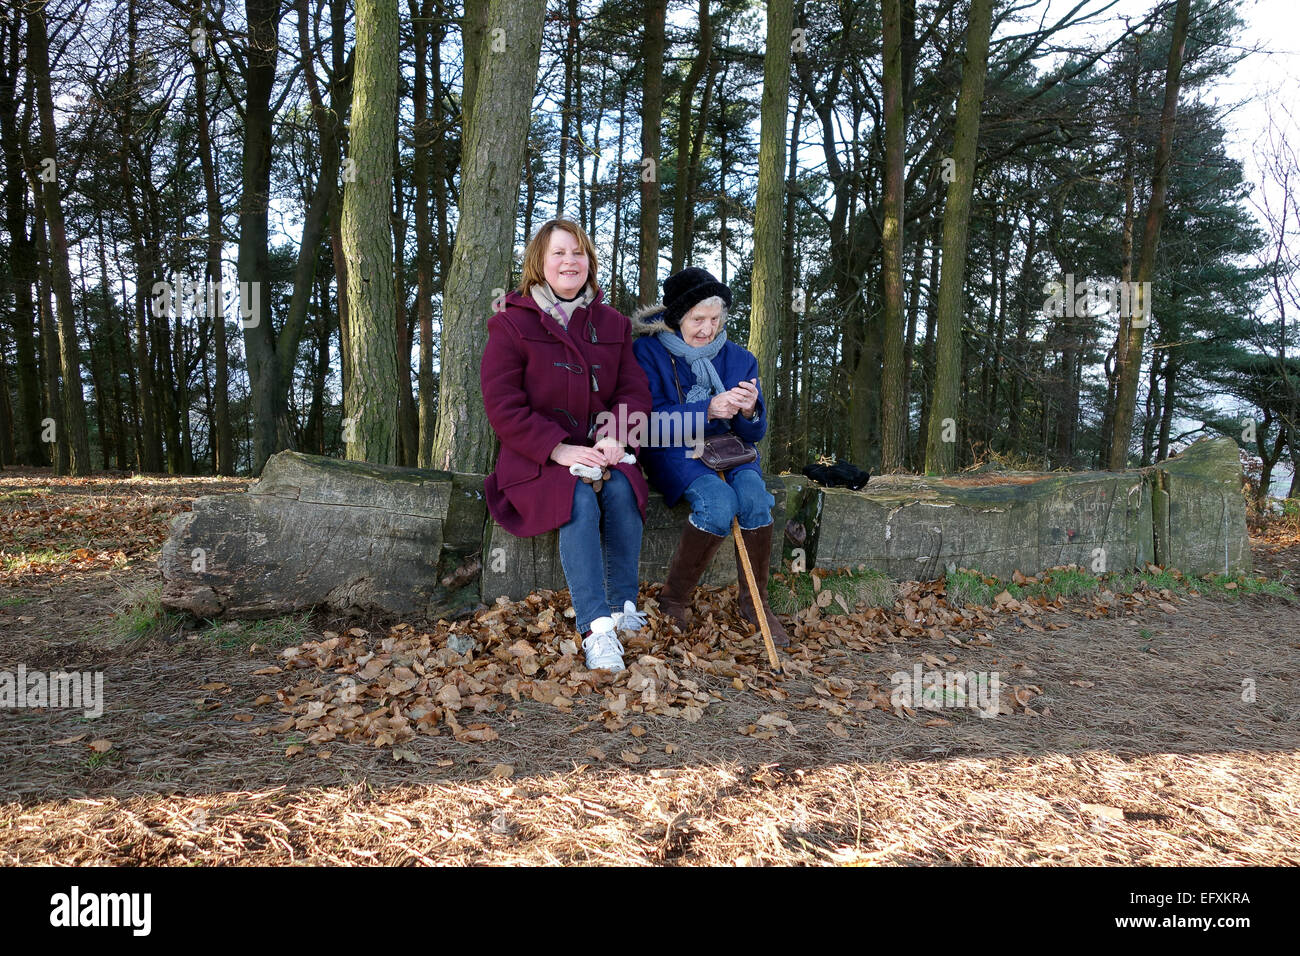 Walkers taking a rest on The Wrekin Hill in Shropshire 93 year old Connie Emmott with her daughter Elizabeth both are Jehovah Wi Stock Photo